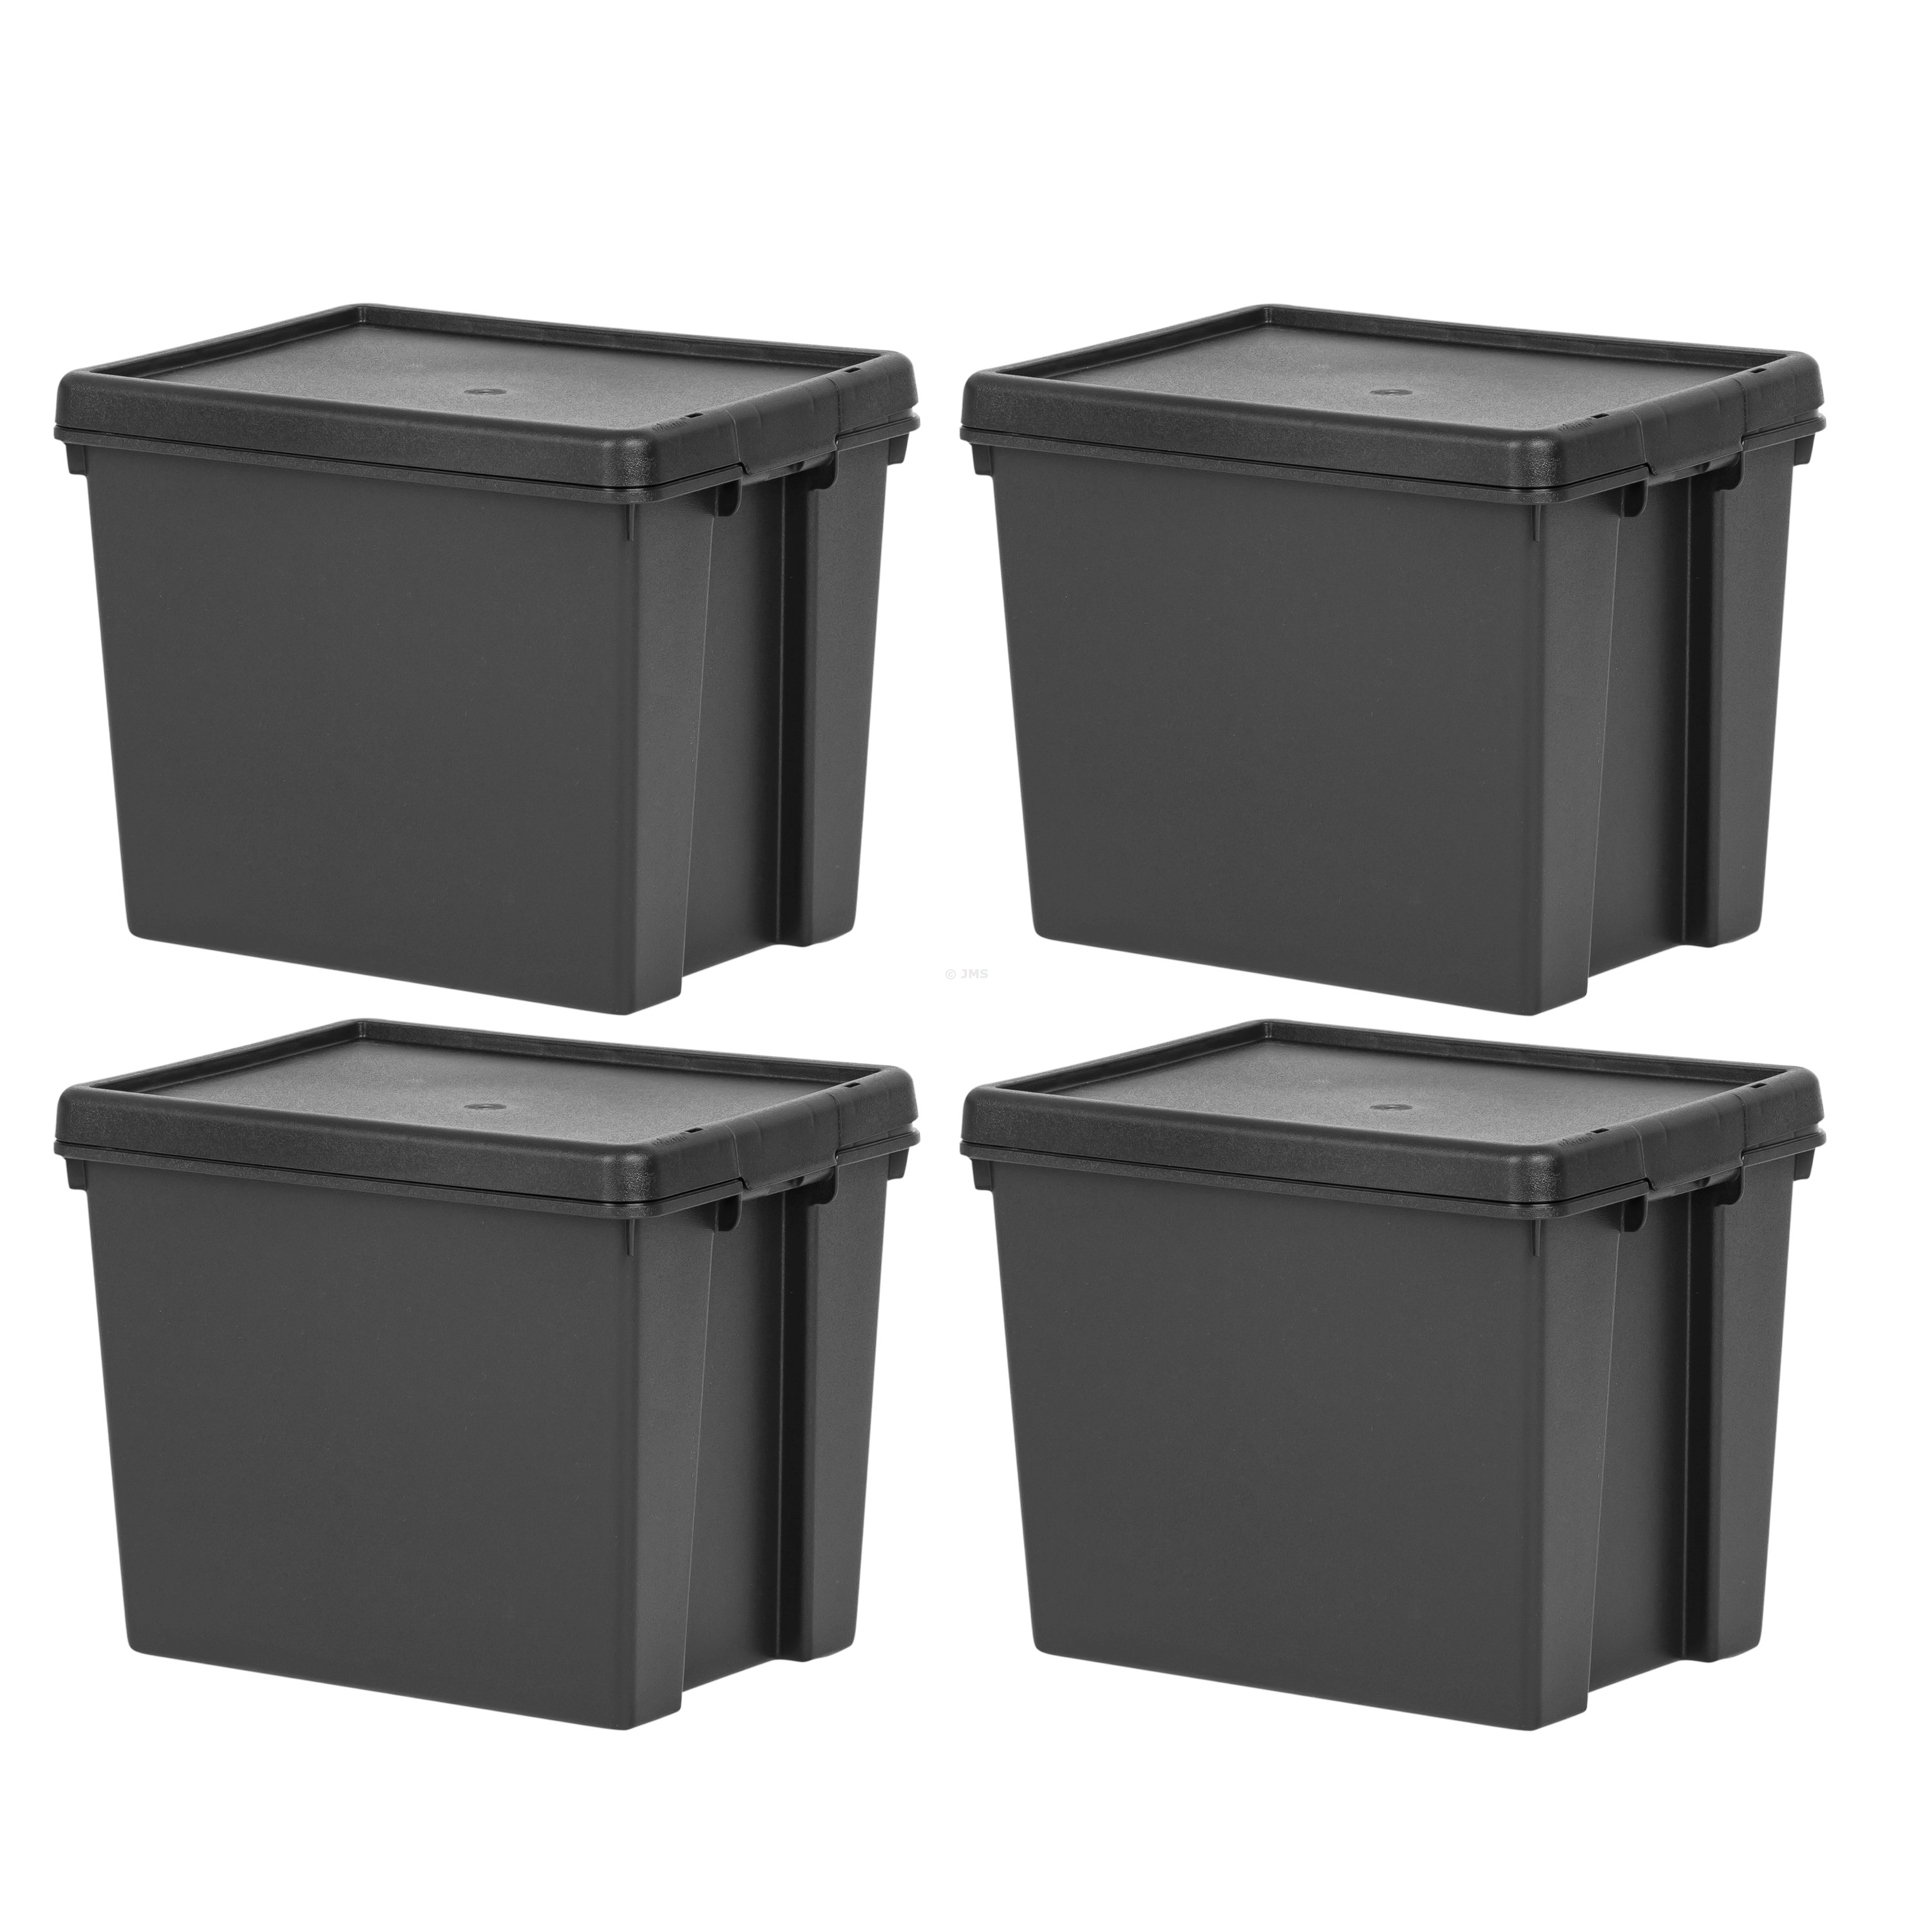 [Set of 4] Heavy Duty 24L Black Storage Box with Lid Recycled Plastic Stackable Nestable Containers Home Office Garage Toolbox